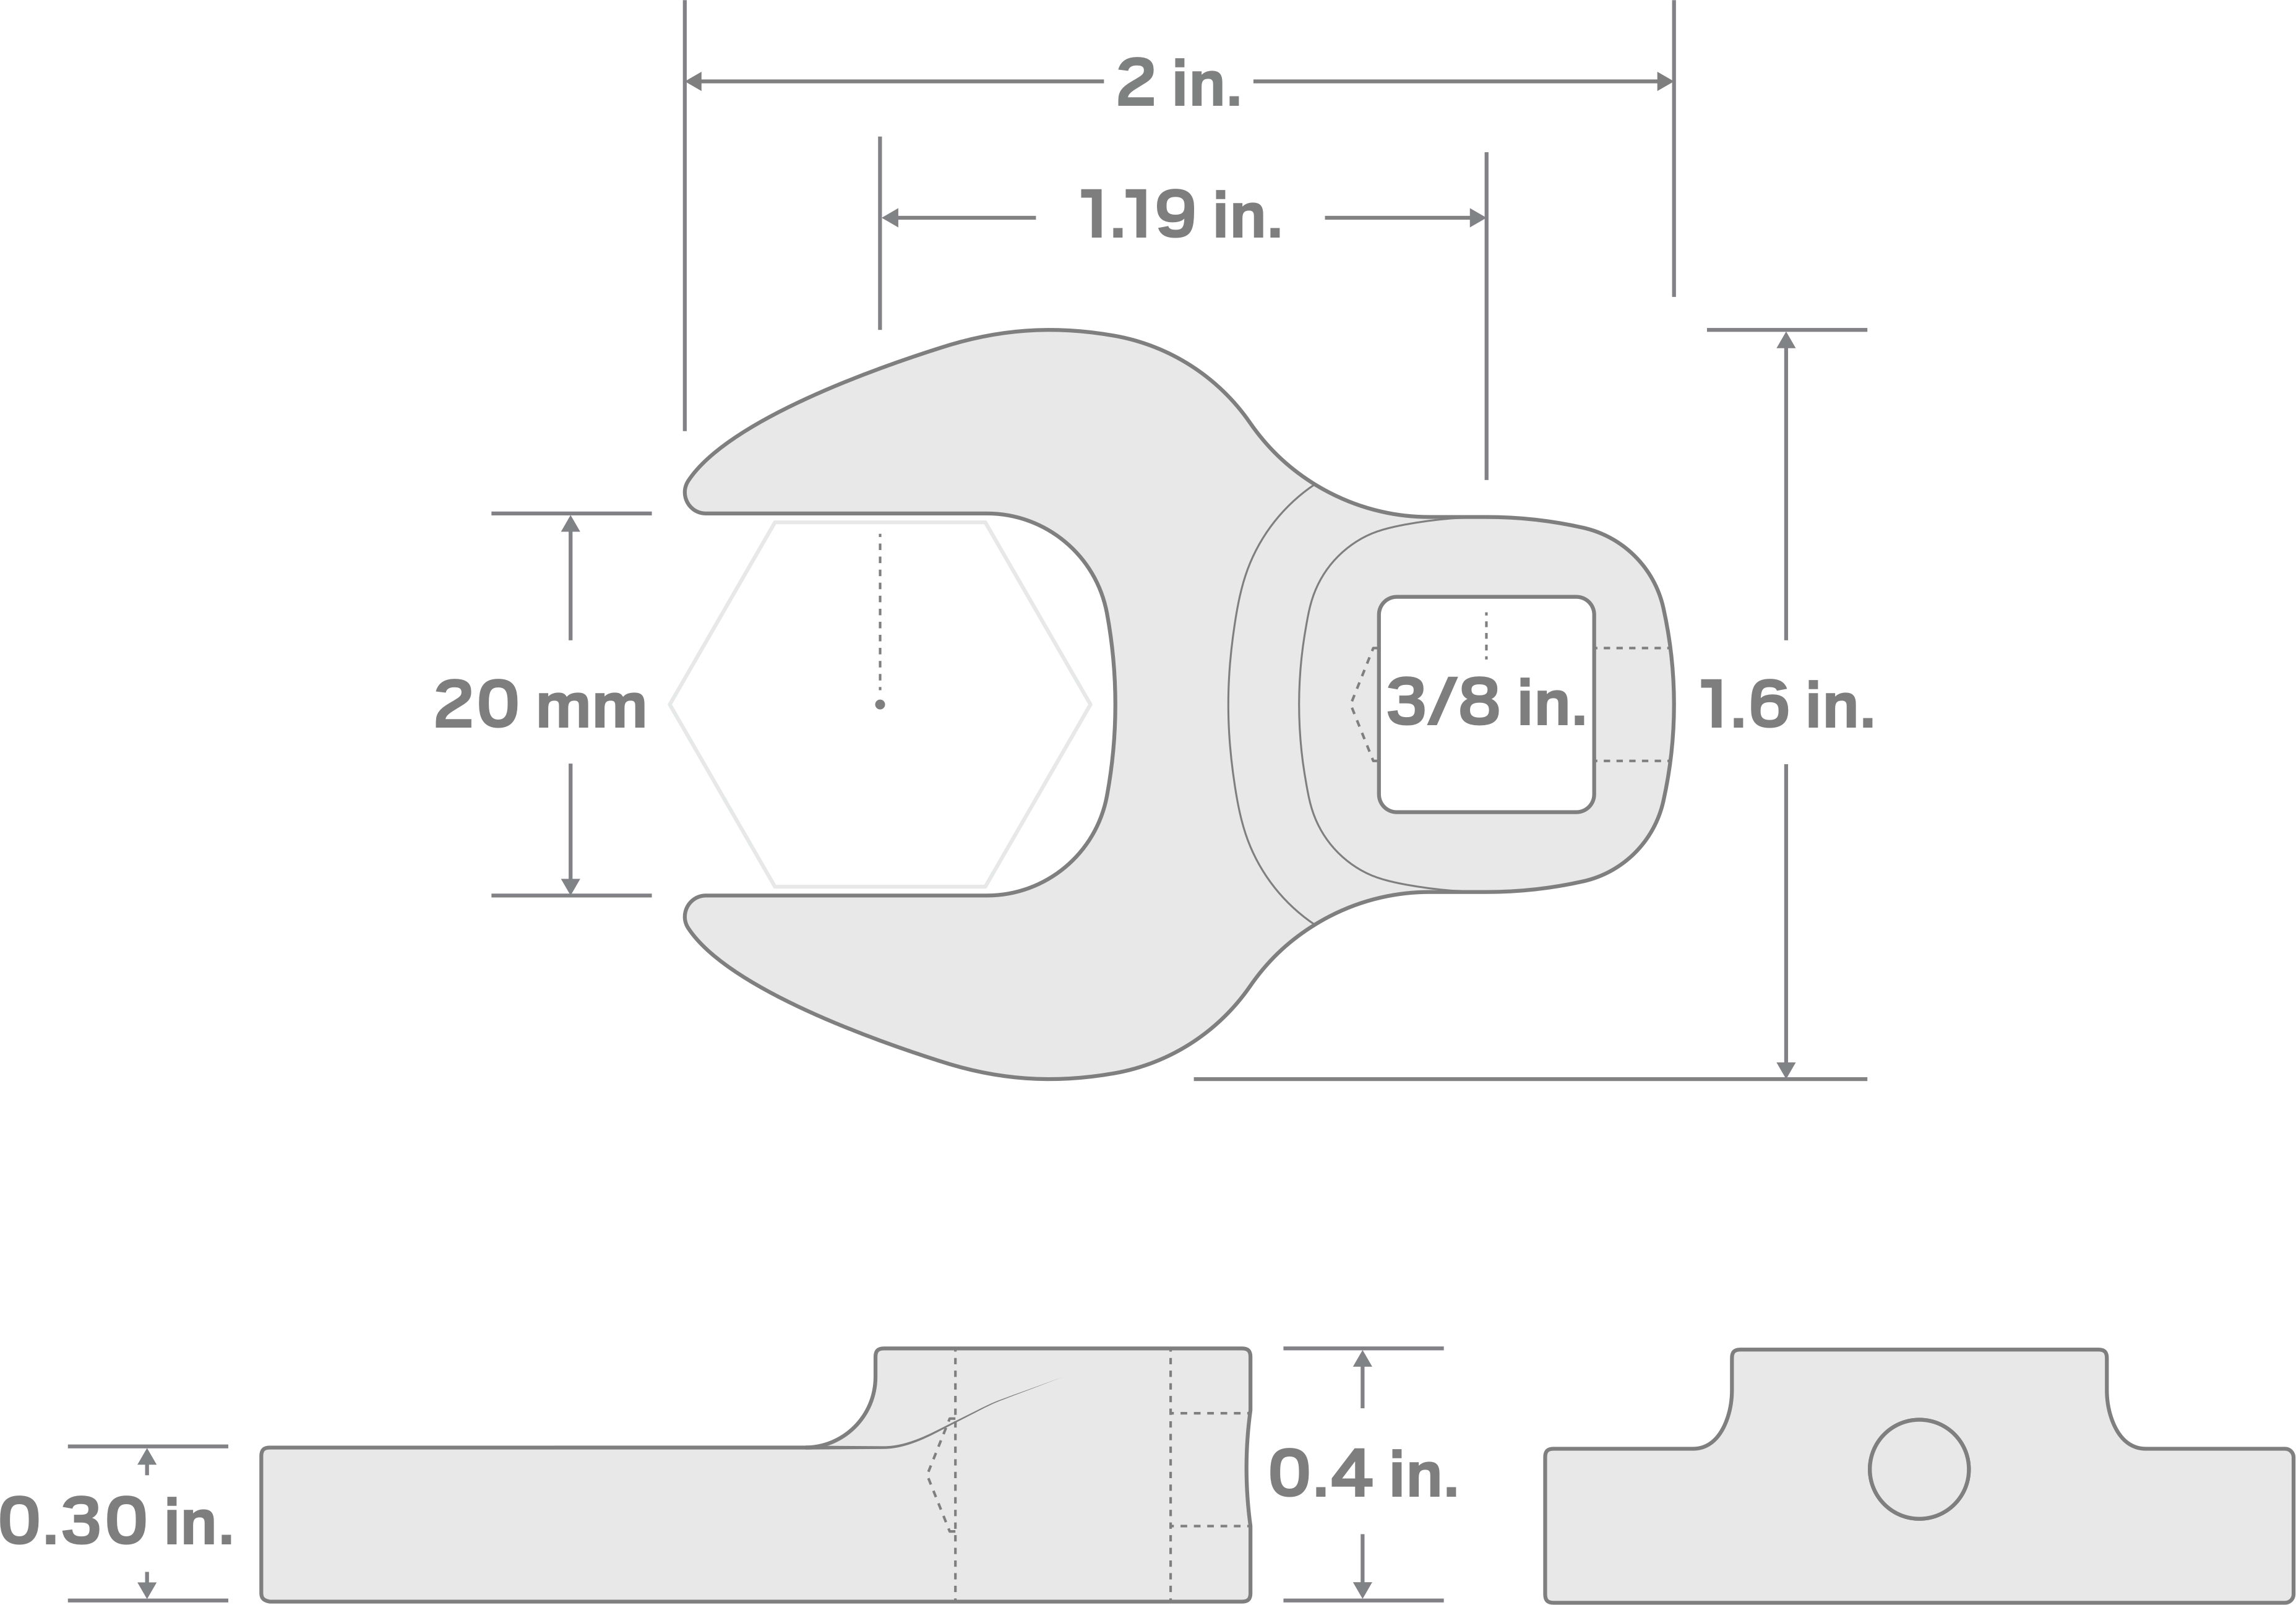 Specs for 3/8 Inch Drive x 20 mm Crowfoot Wrench